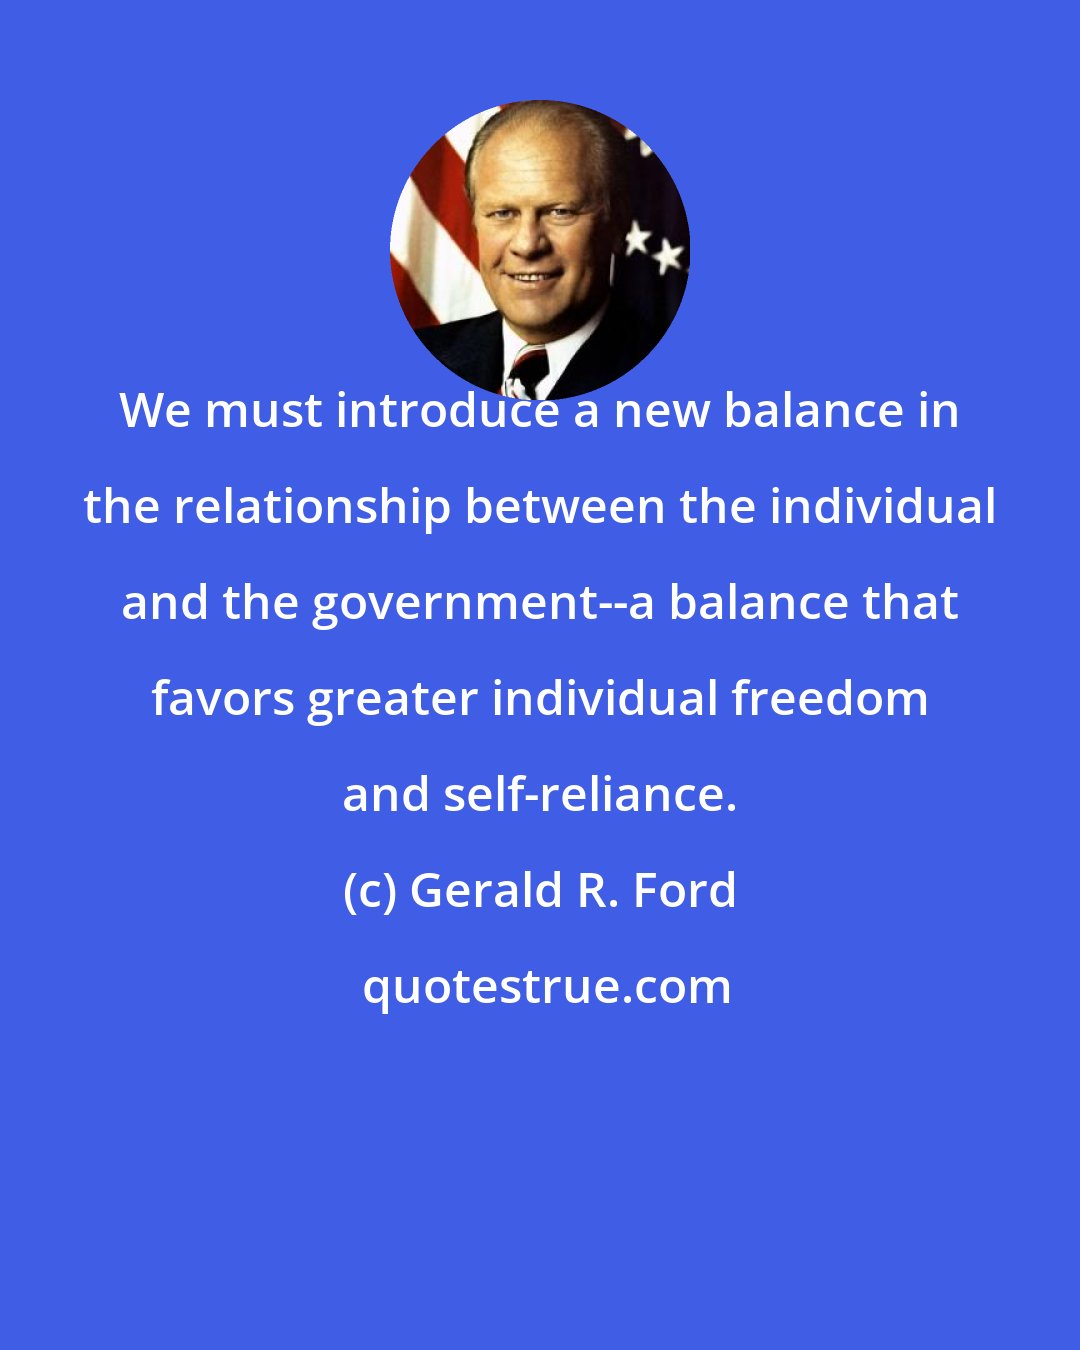 Gerald R. Ford: We must introduce a new balance in the relationship between the individual and the government--a balance that favors greater individual freedom and self-reliance.